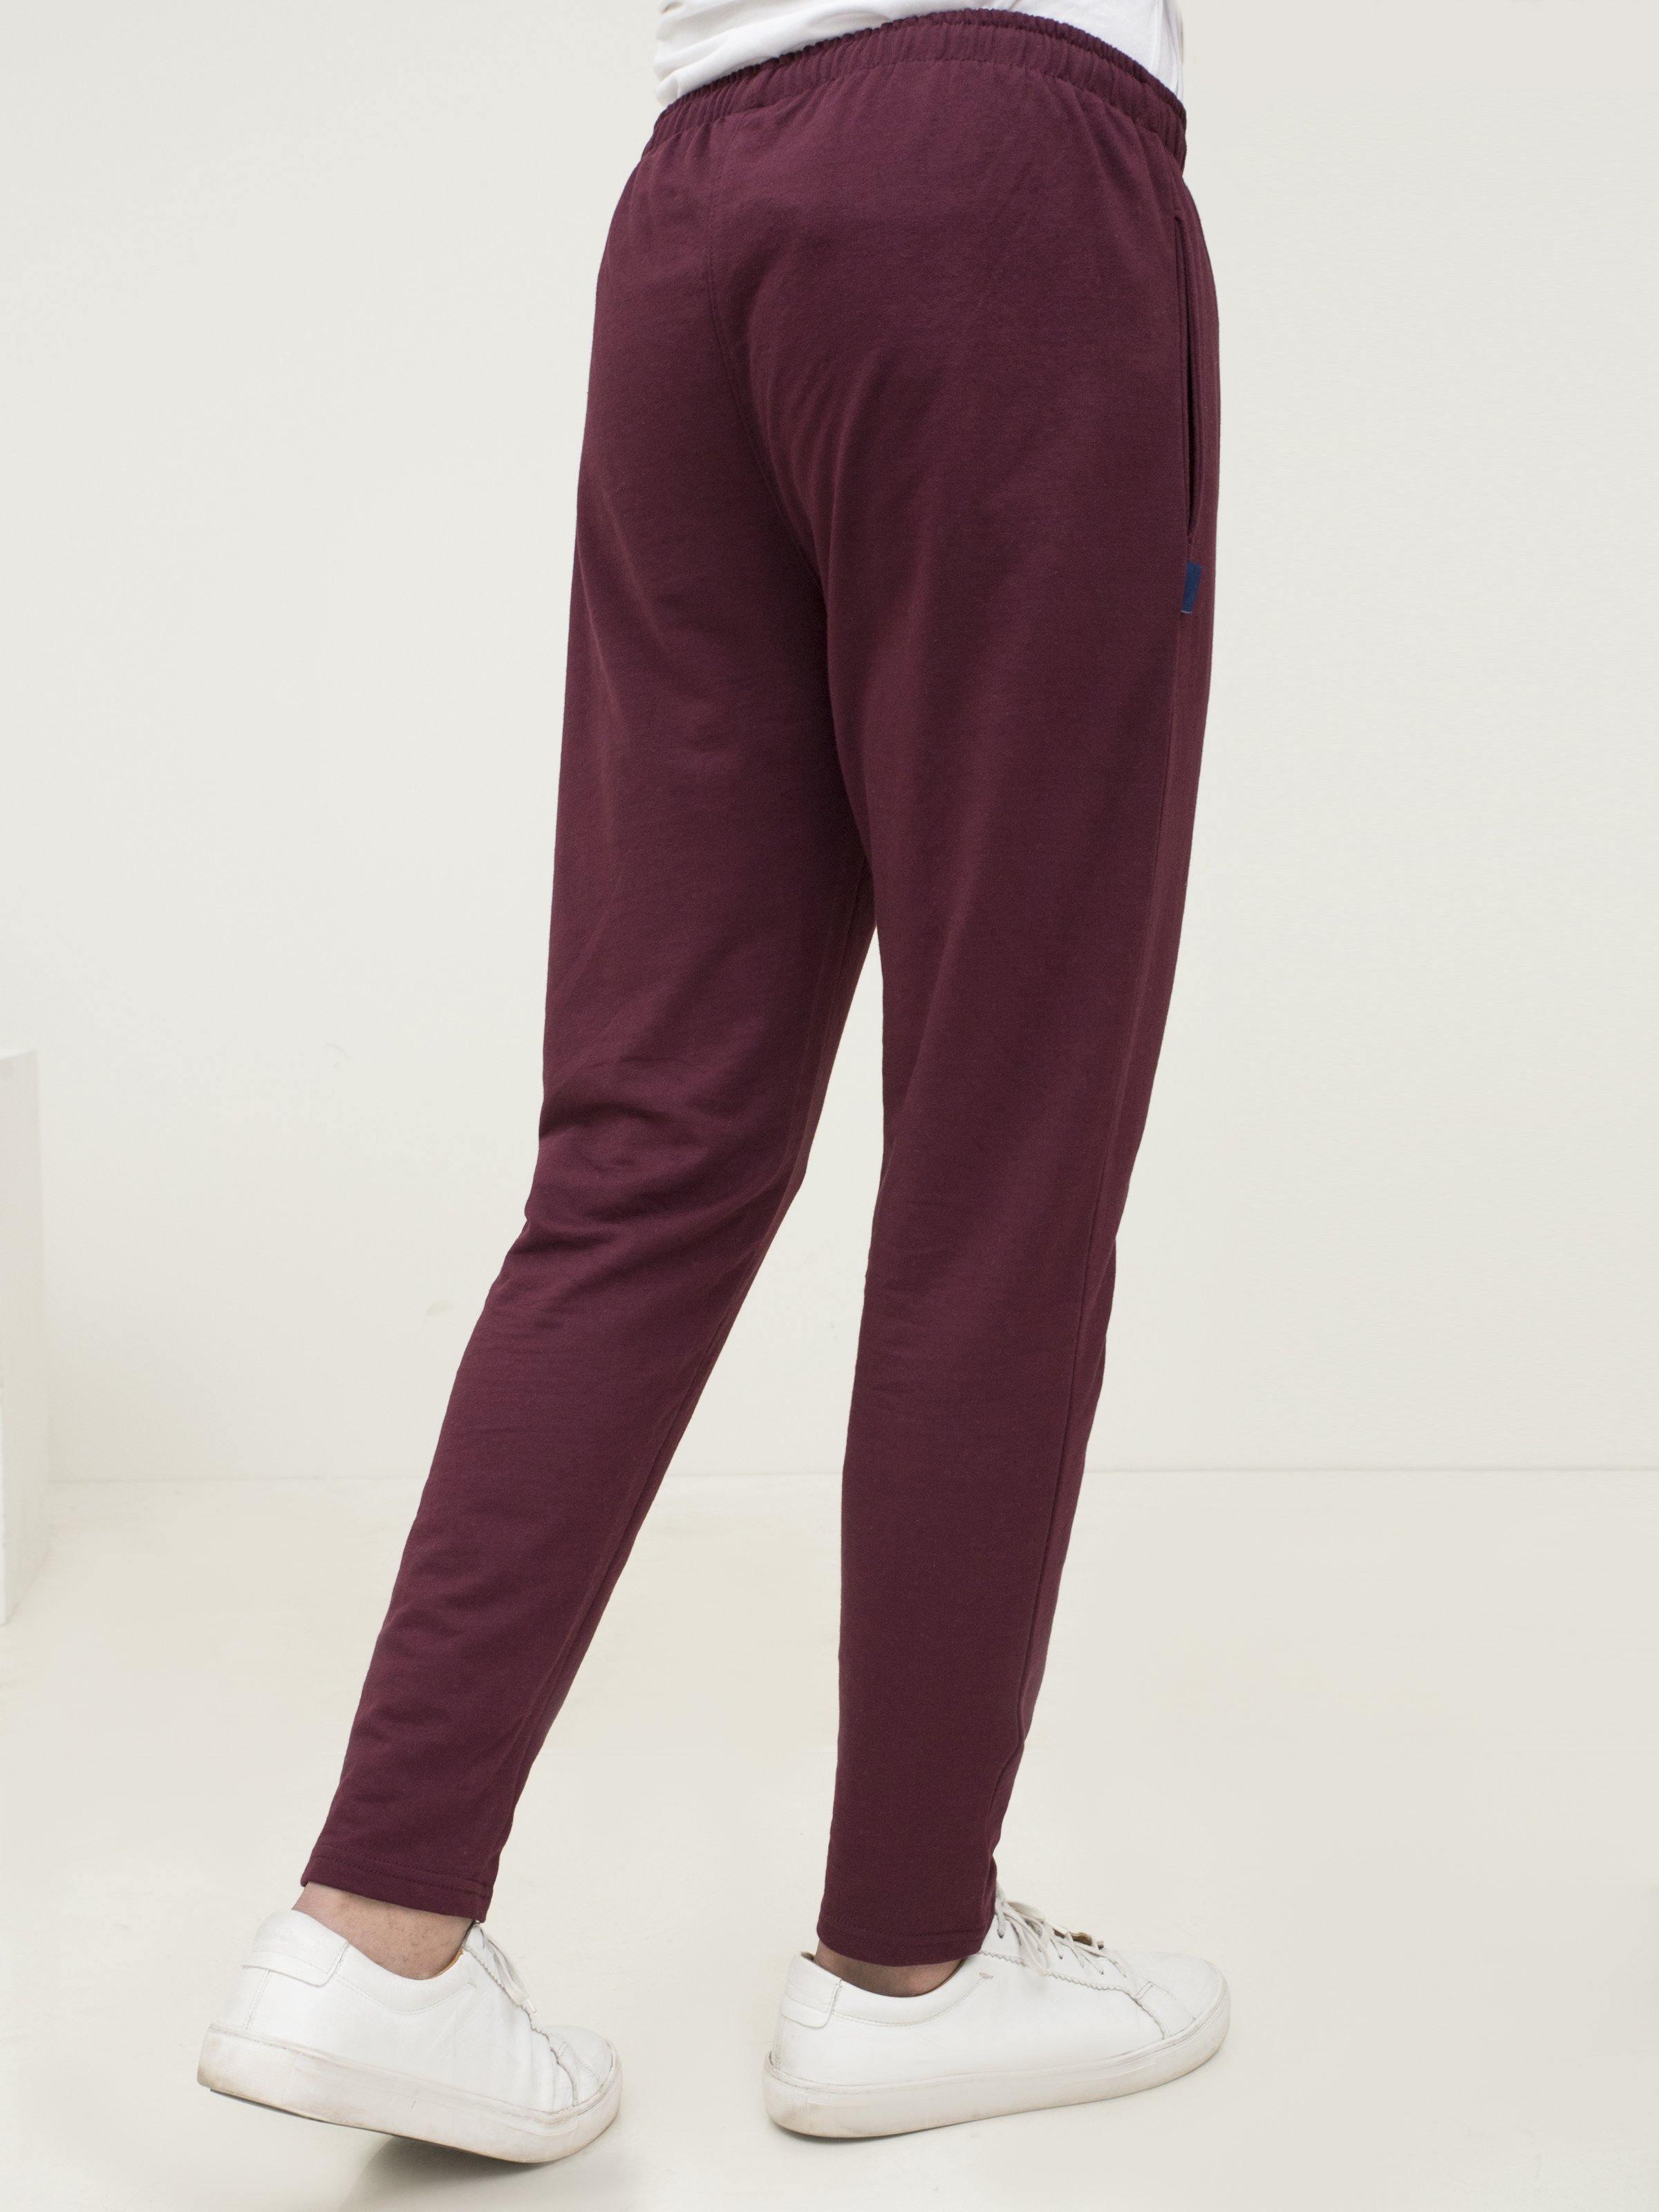 CASUAL TROUSER KNITTED SLEEPWEAR MAROON MELANGE at Charcoal Clothing